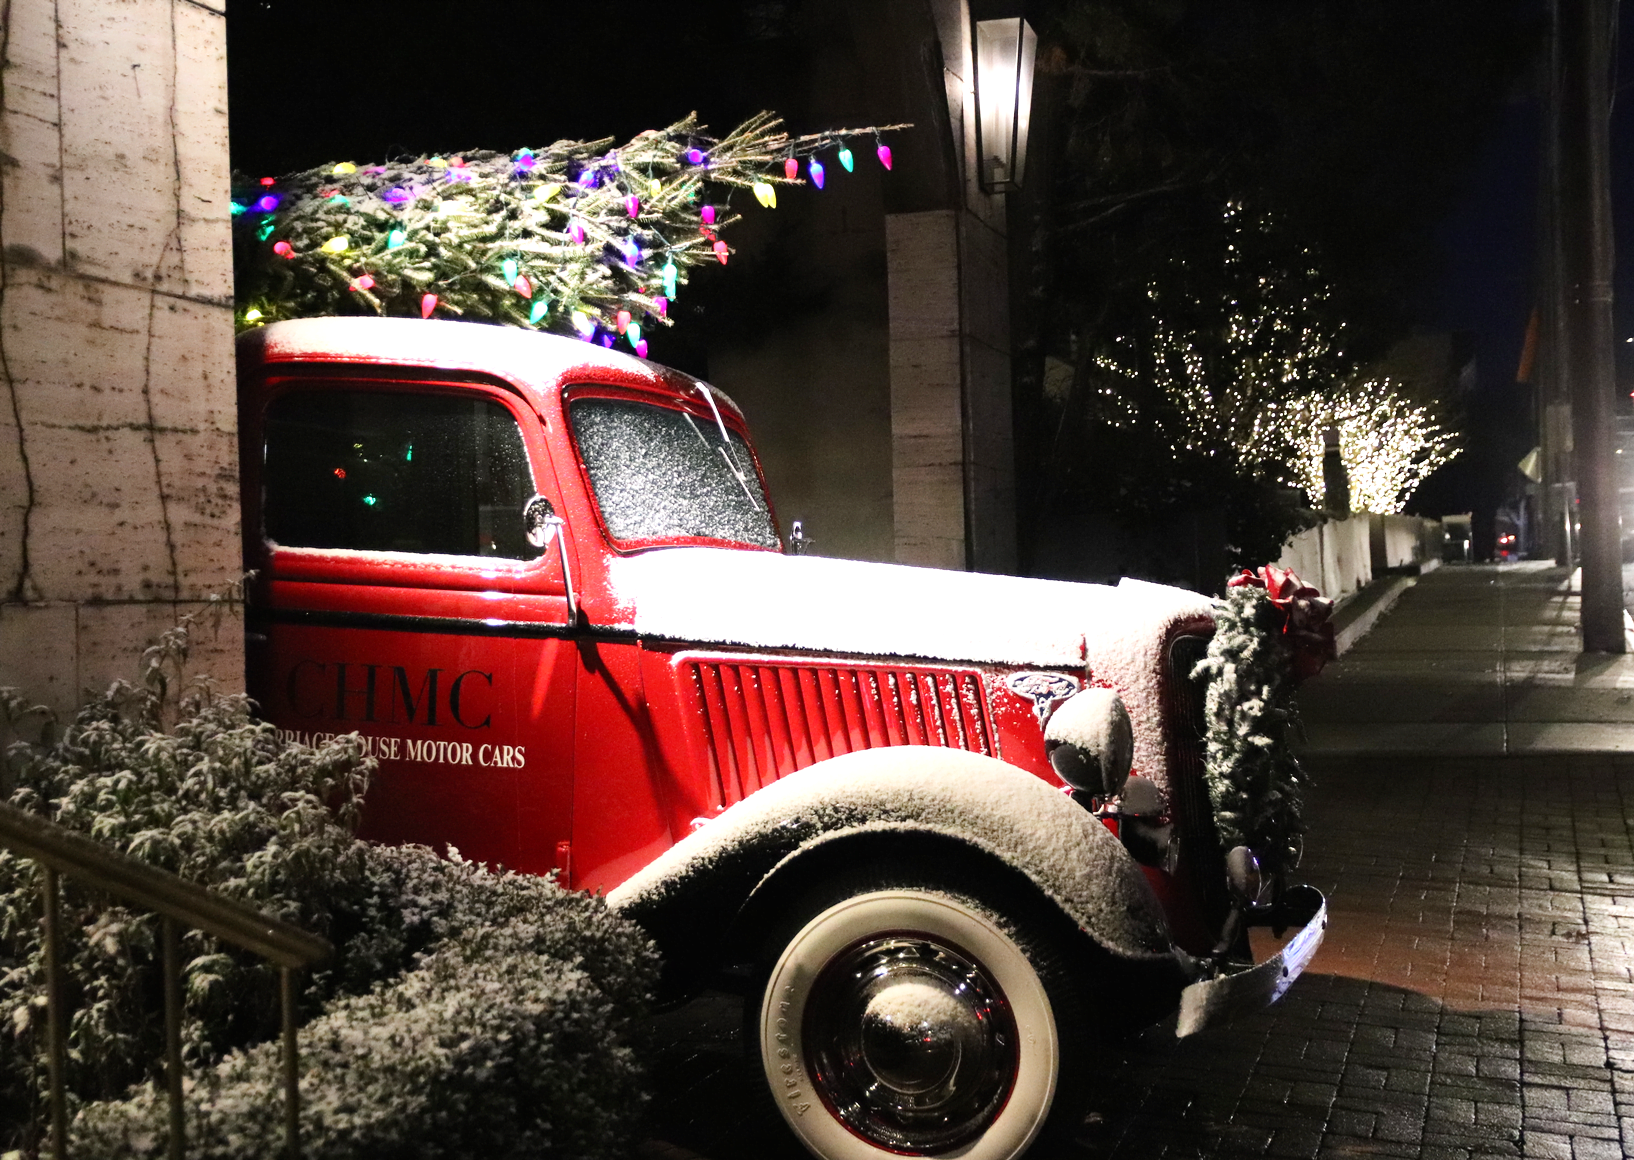 Dusted with snow, a vintage car at Carriage House Motor Cars on Railroad Ave is topped with a Christmas tree speckled with colorful lights. Dec 17, 2019 Photo: Leslie Yager